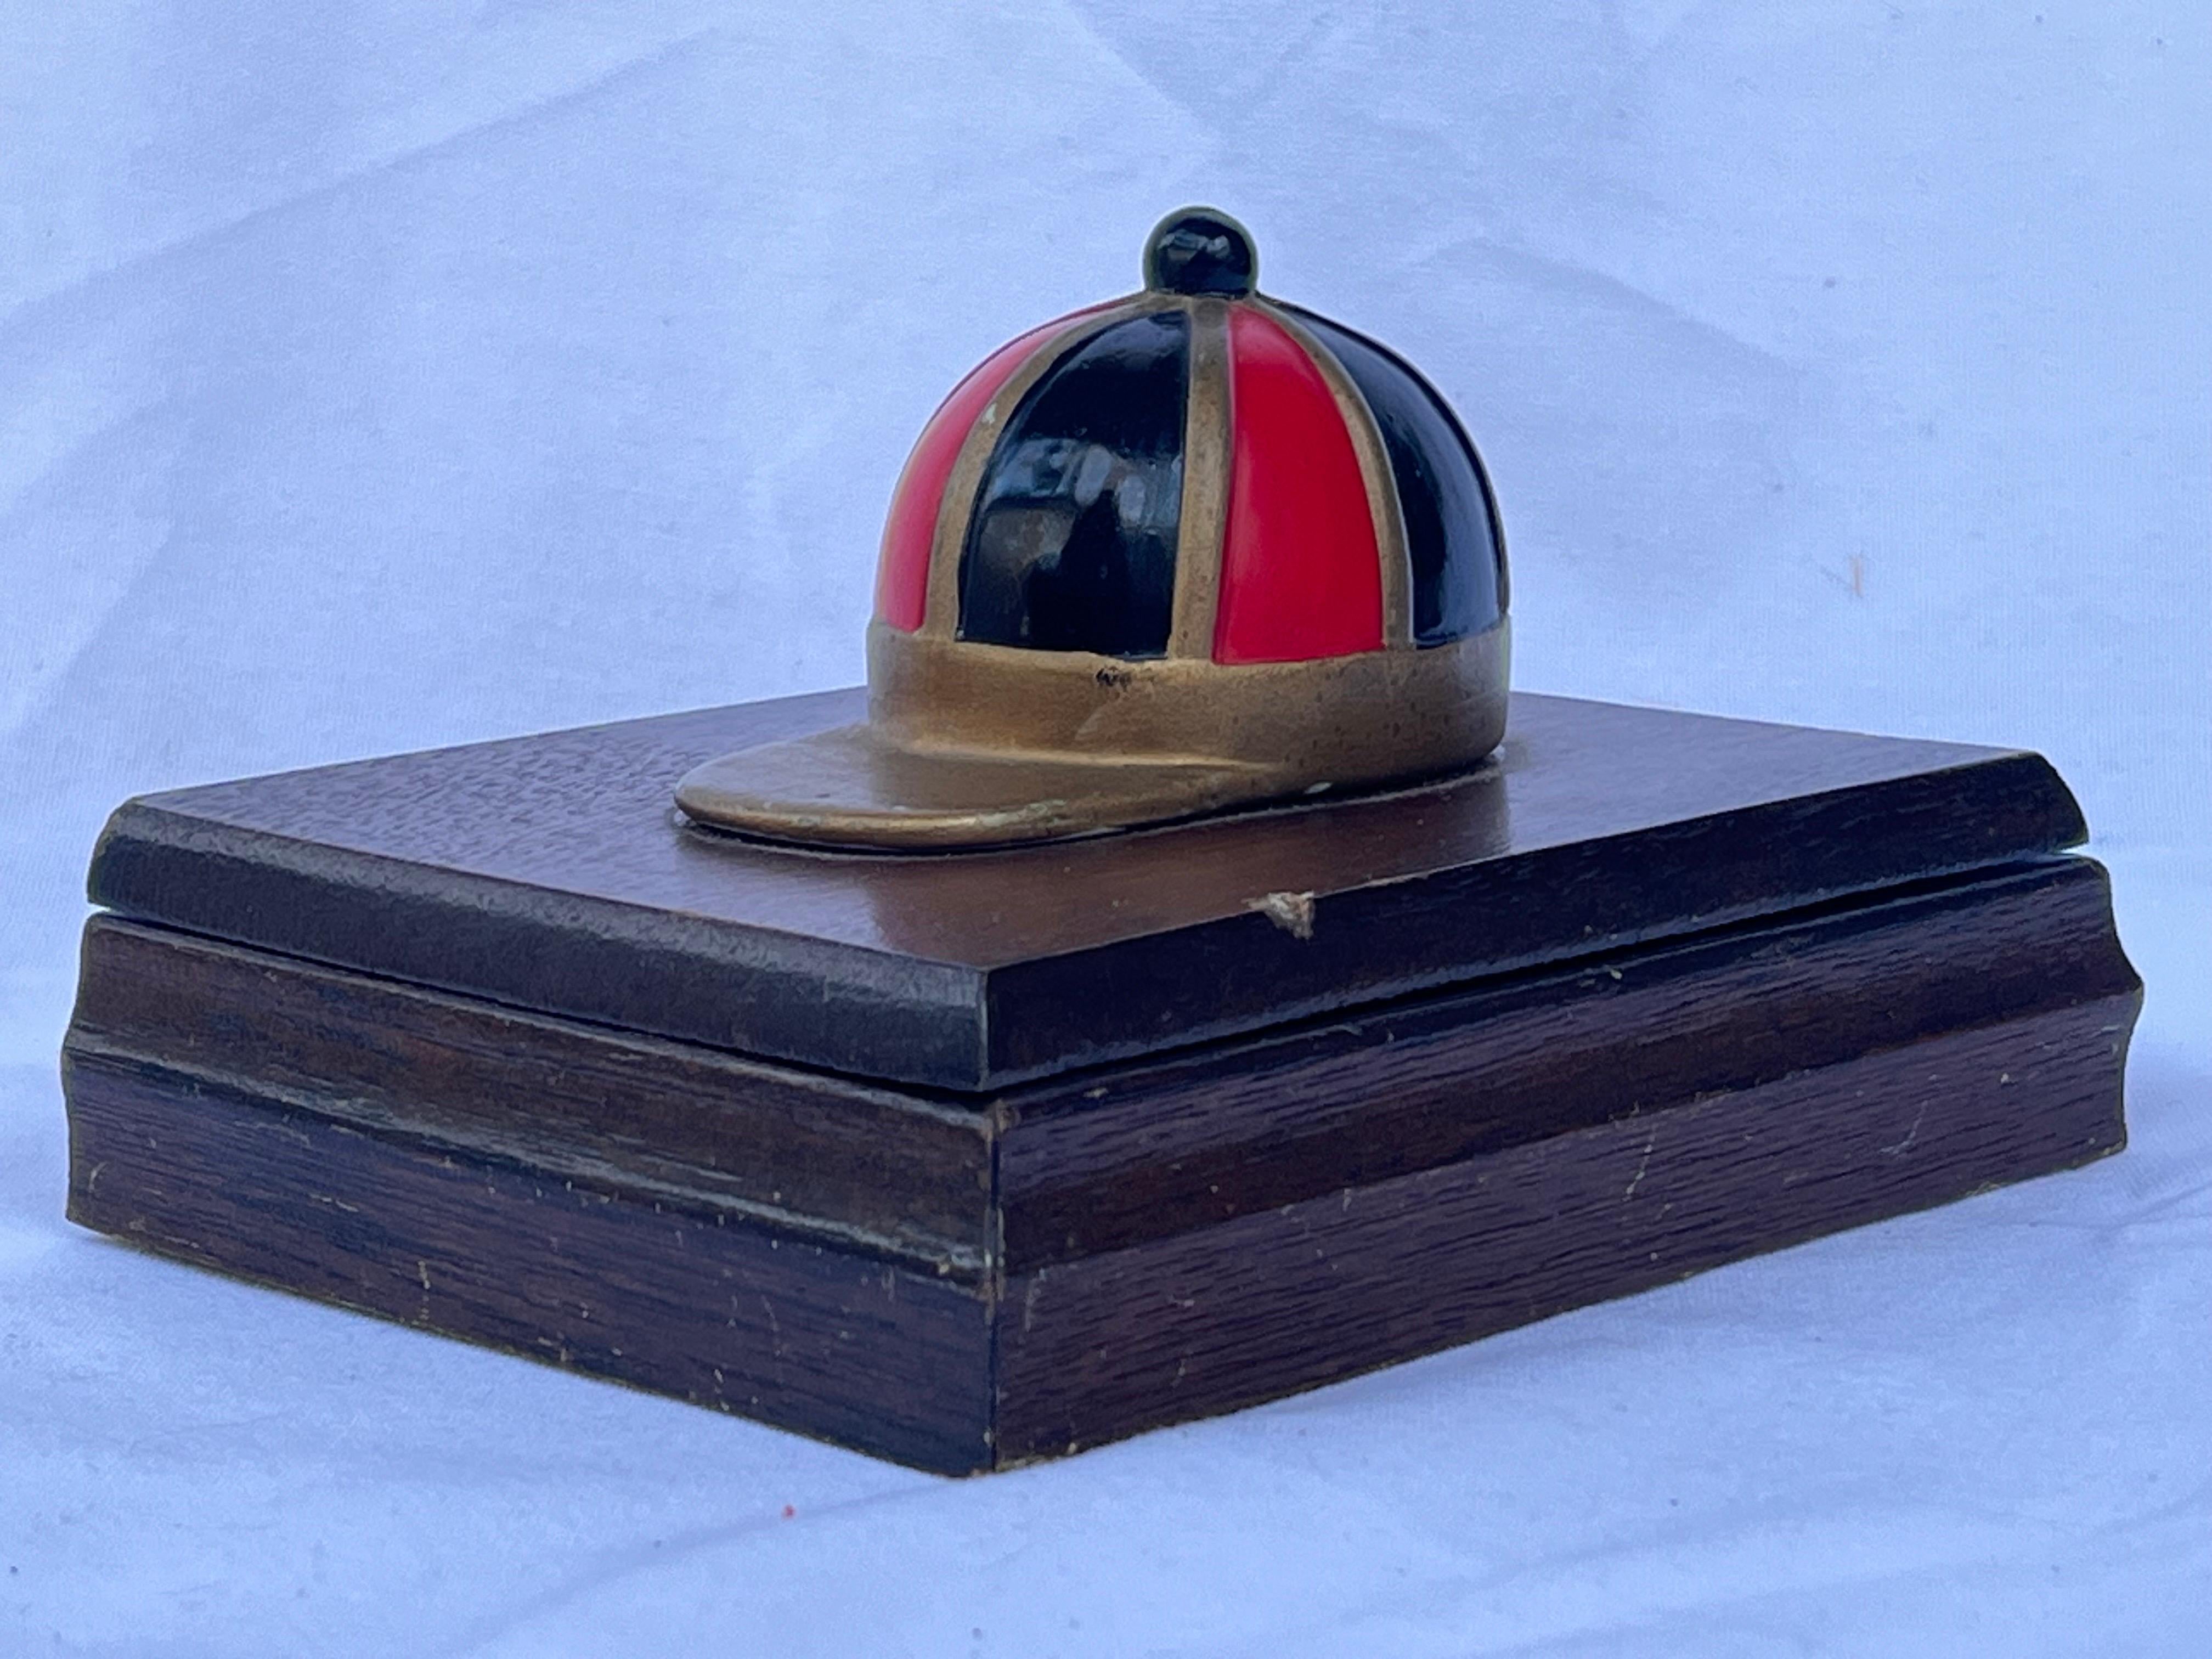 Red and Black Enamel on Brass Jockey Cap Vintage Wood Playing Card Box Accessory In Good Condition For Sale In Atlanta, GA